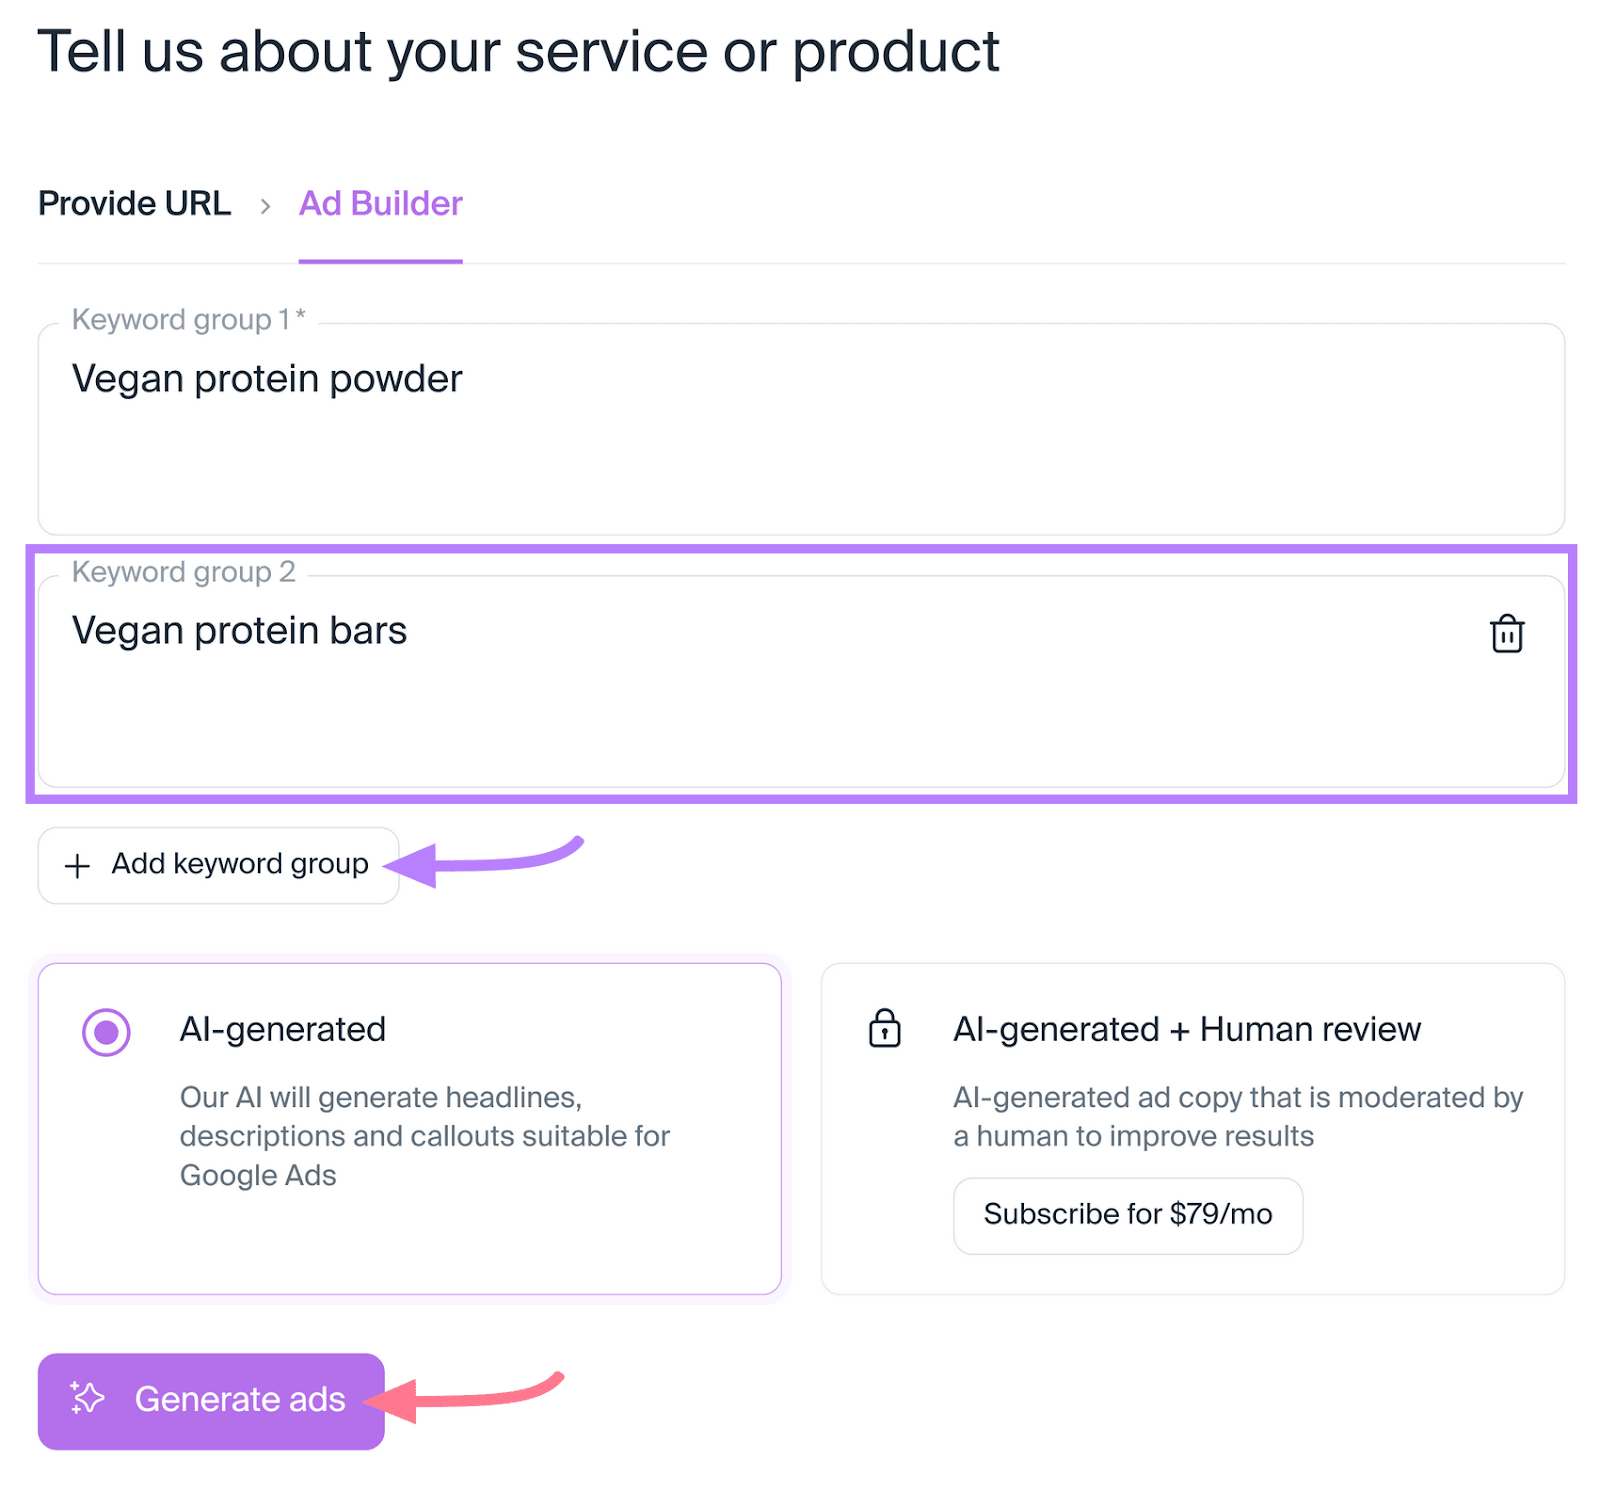 "Keyword group 2" field highlighted under "Tell us about your service or product" window in AI Ad Copy Generator